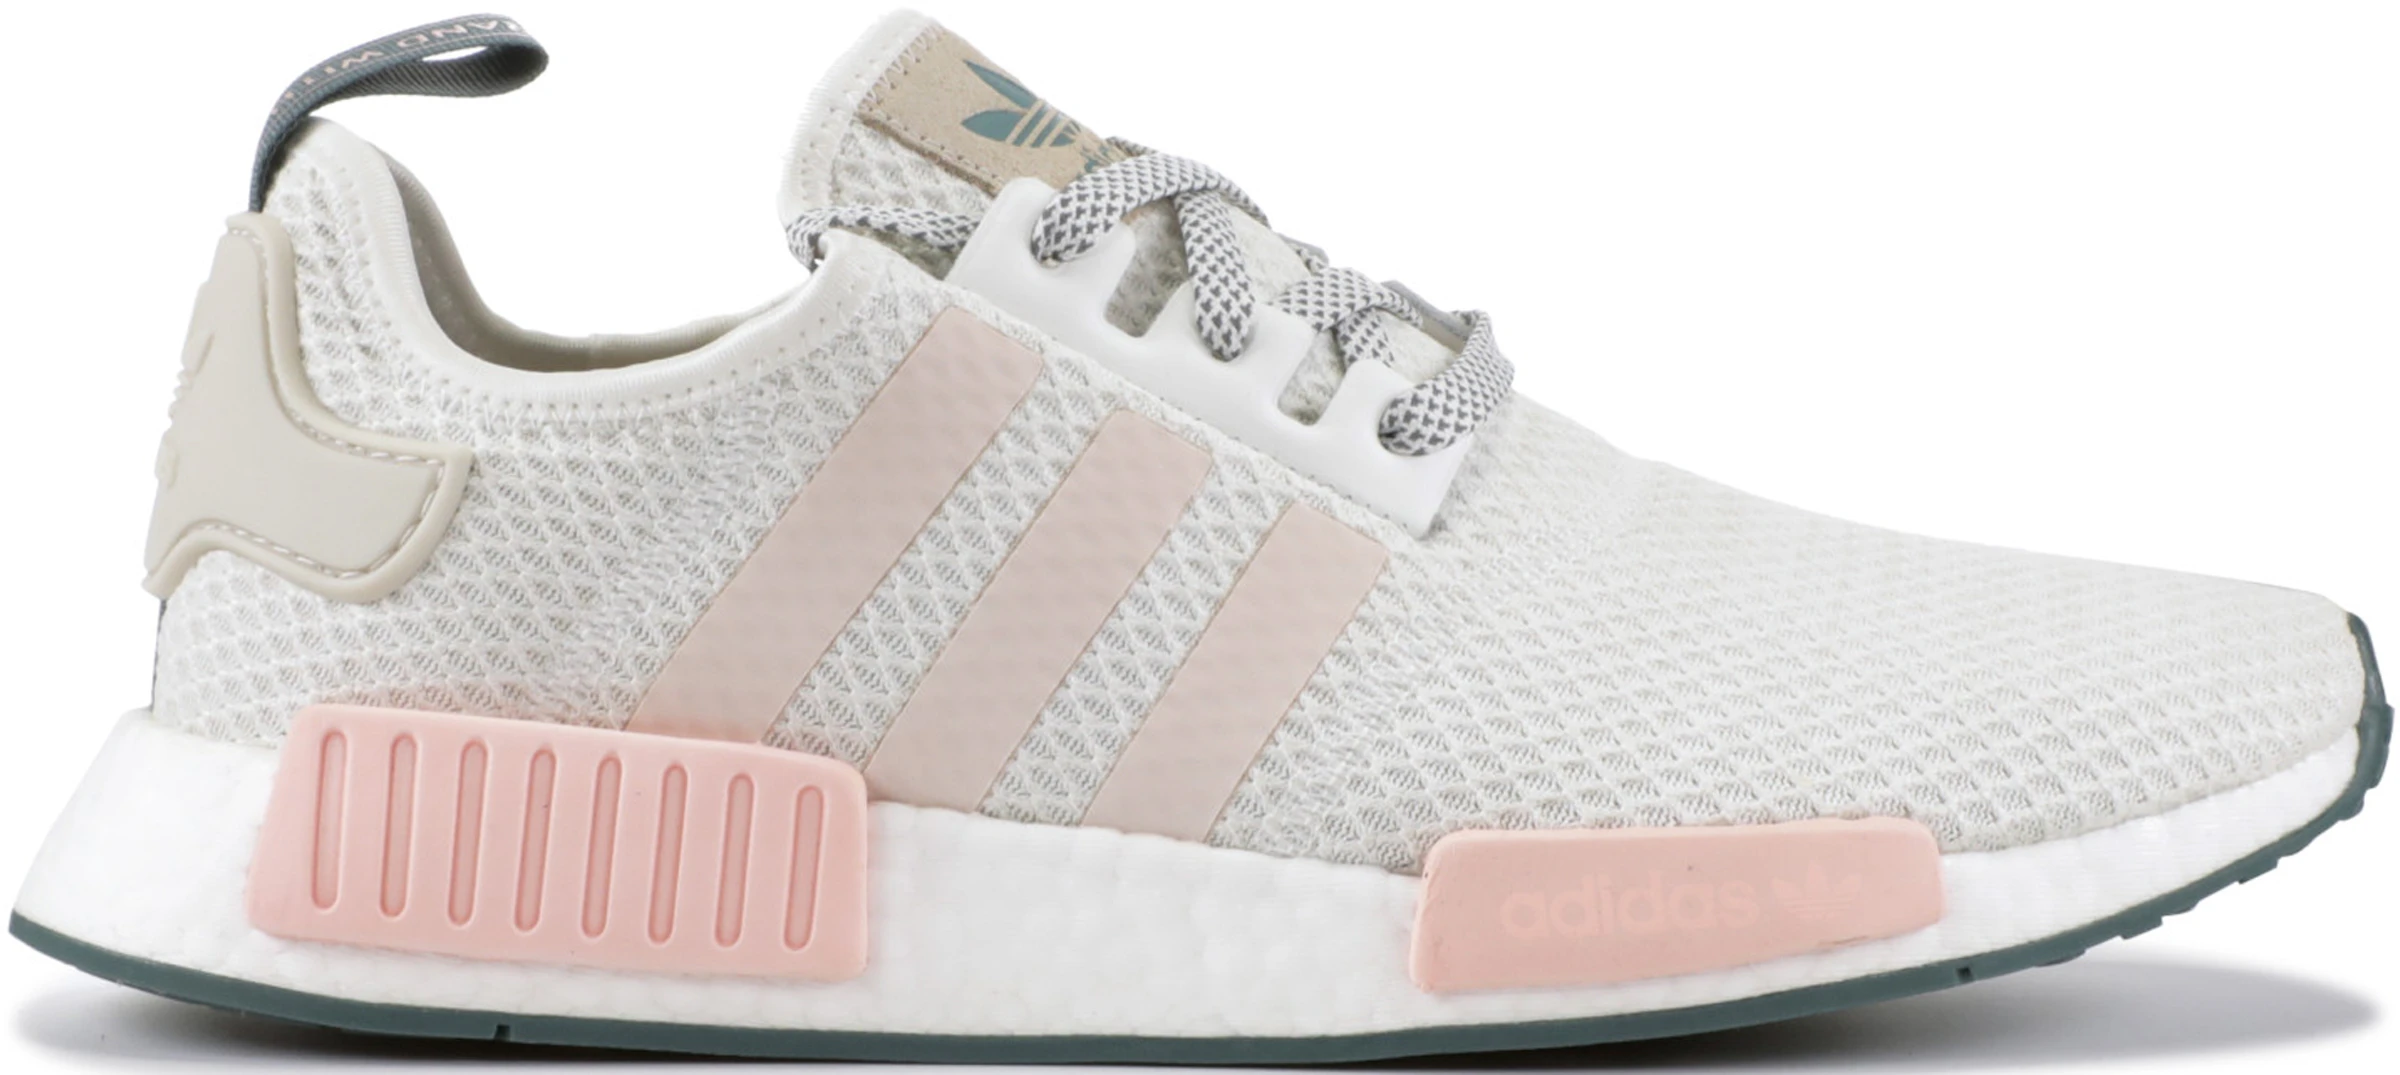 adidas NMD White Icey (W) - D97232 - US